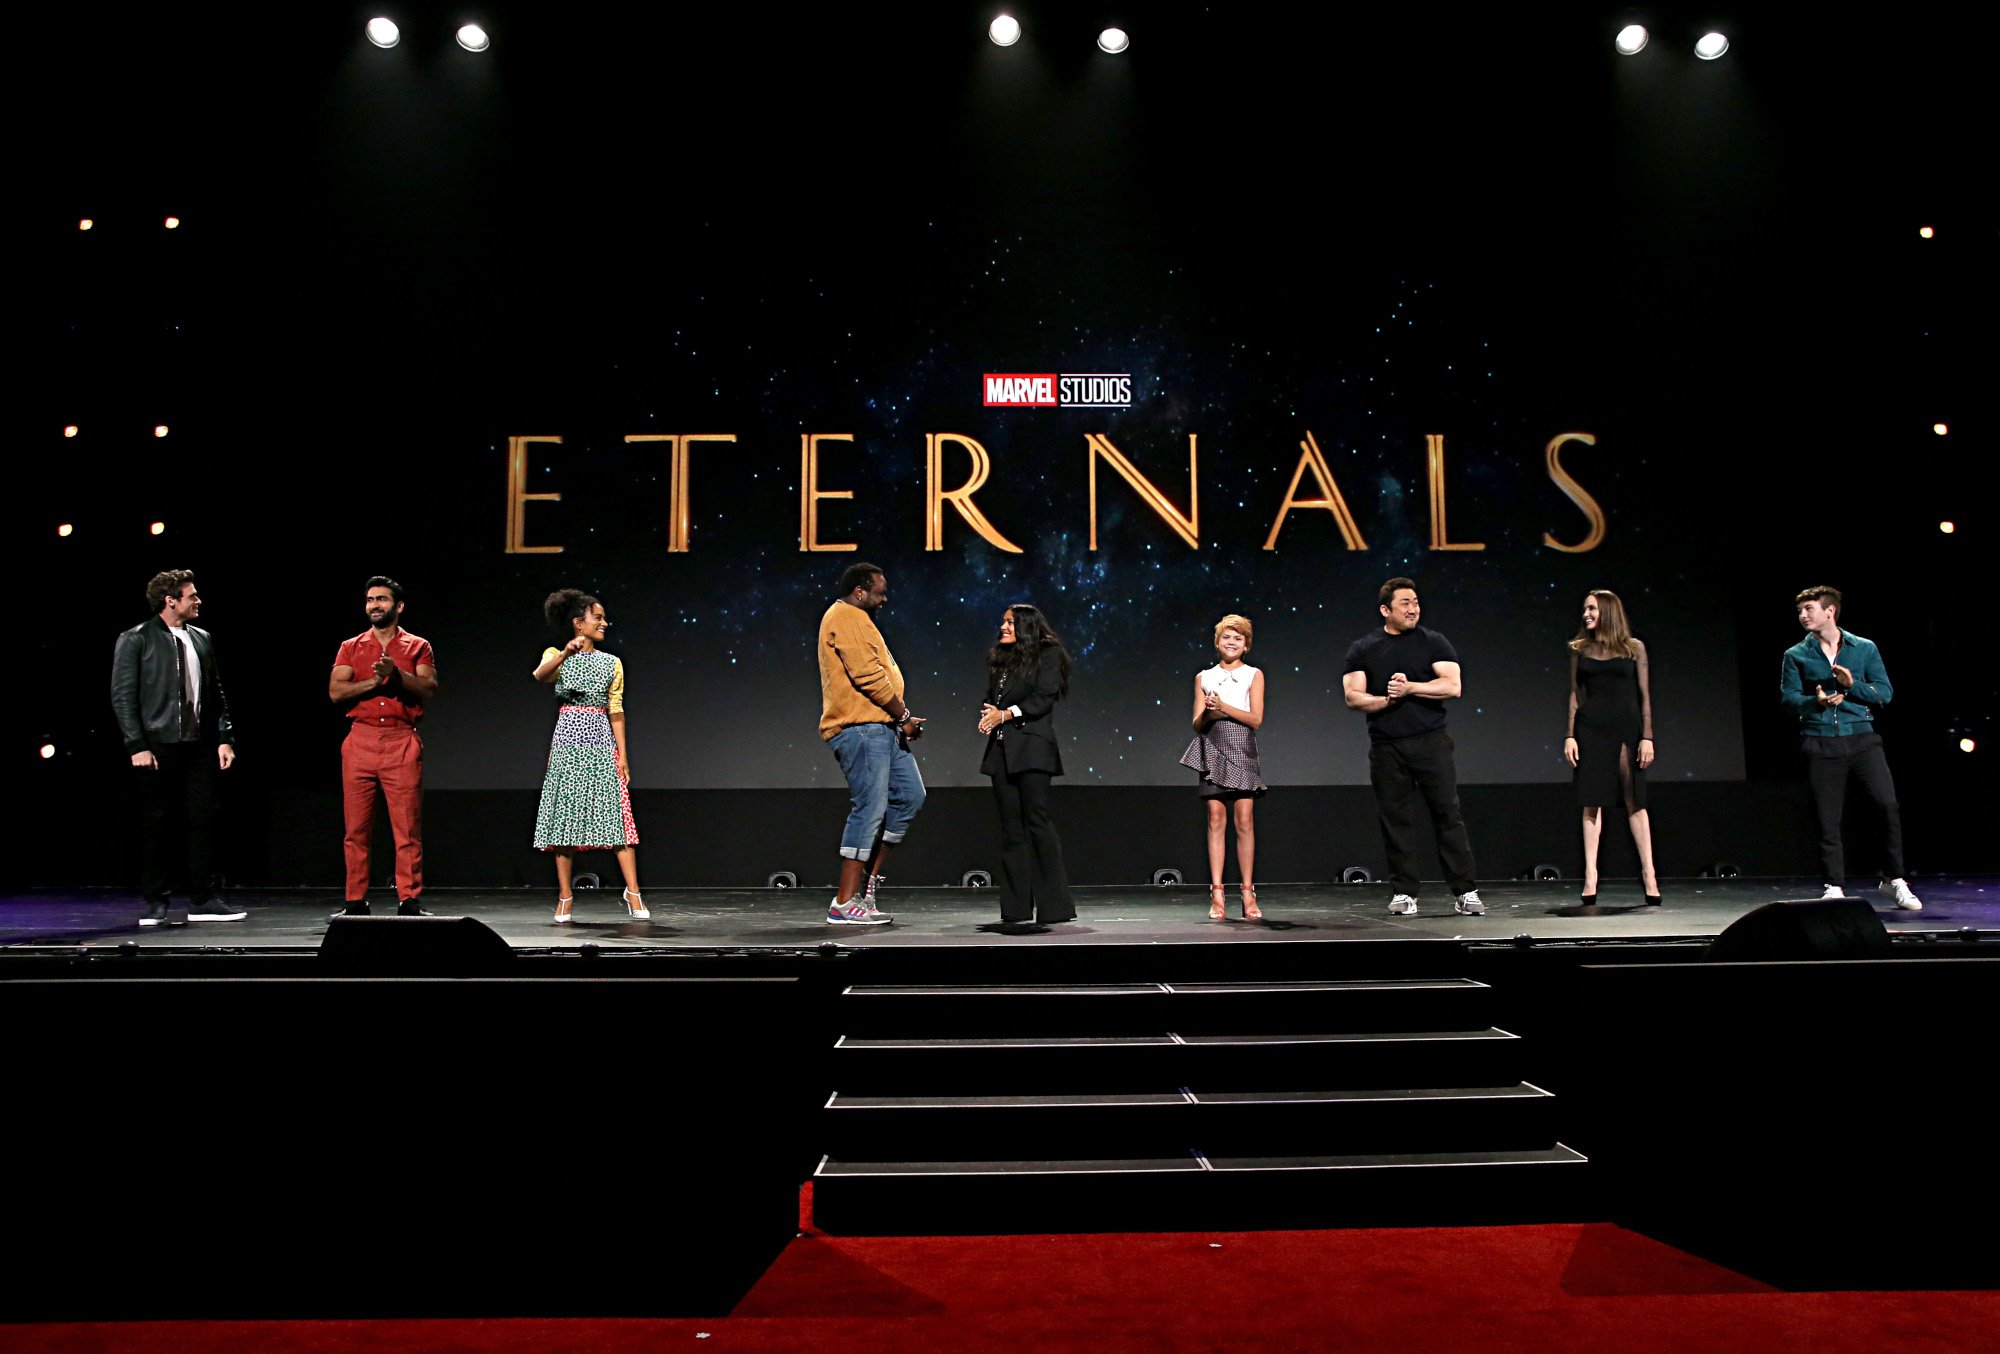 (L-R) Richard Madden, Kumail Nanjiani, Lauren Ridloff, Salma Hayek, Lia McHugh, Don Lee, Angelina Jolie, and Barry Keoghan of 'The Eternals,' which has a new trailer. They're standing on-stage and a logo for the film is behind them.